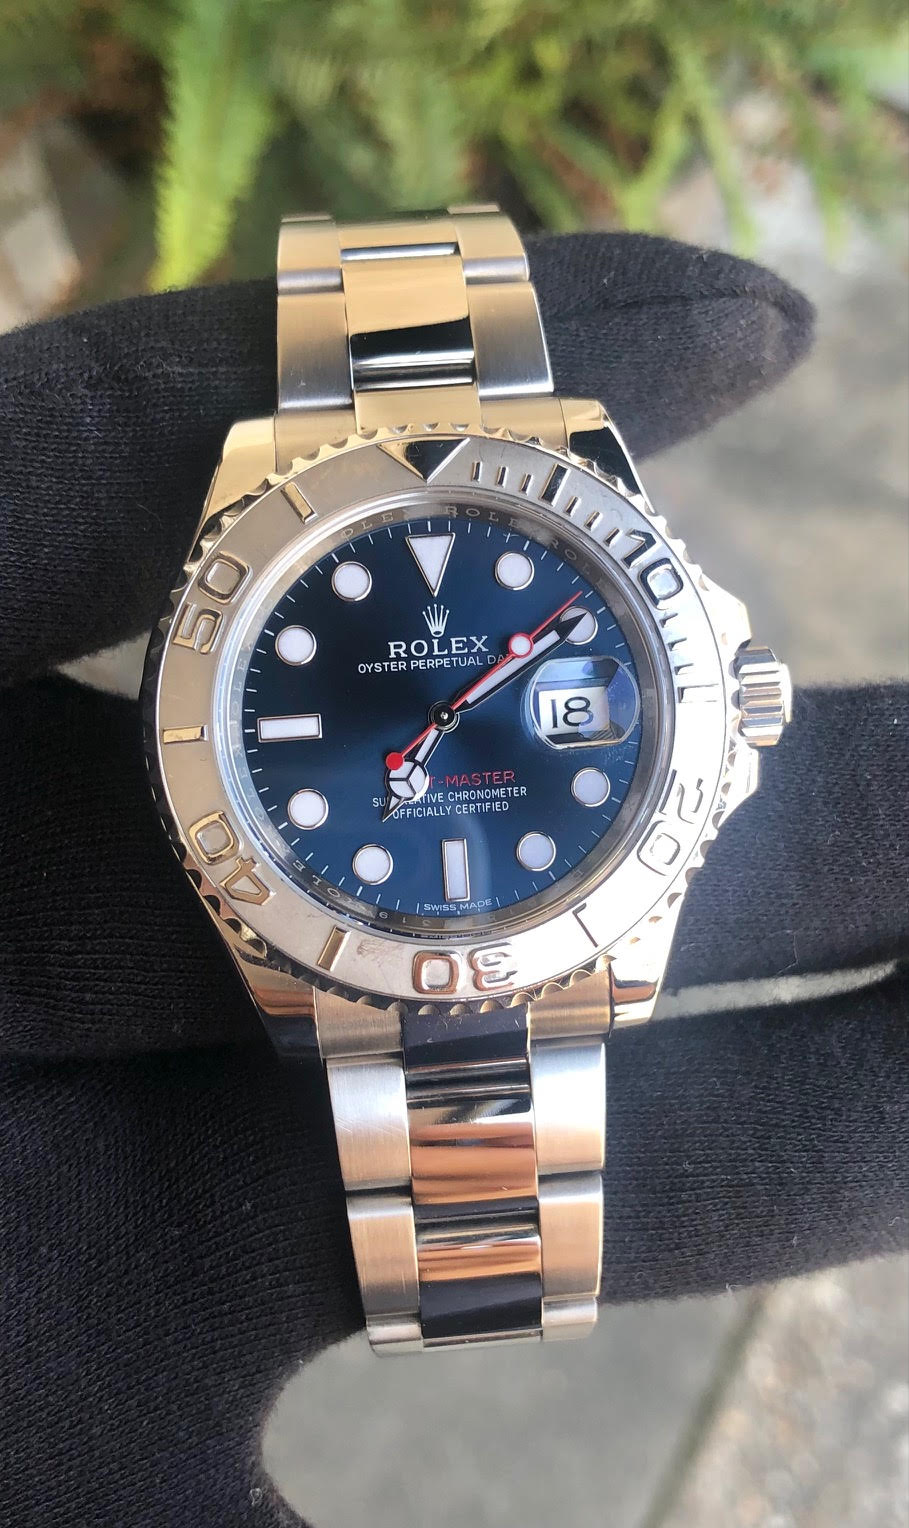 Rolex Stainless Steel and Platinum Yacht-Master with Blue Dial